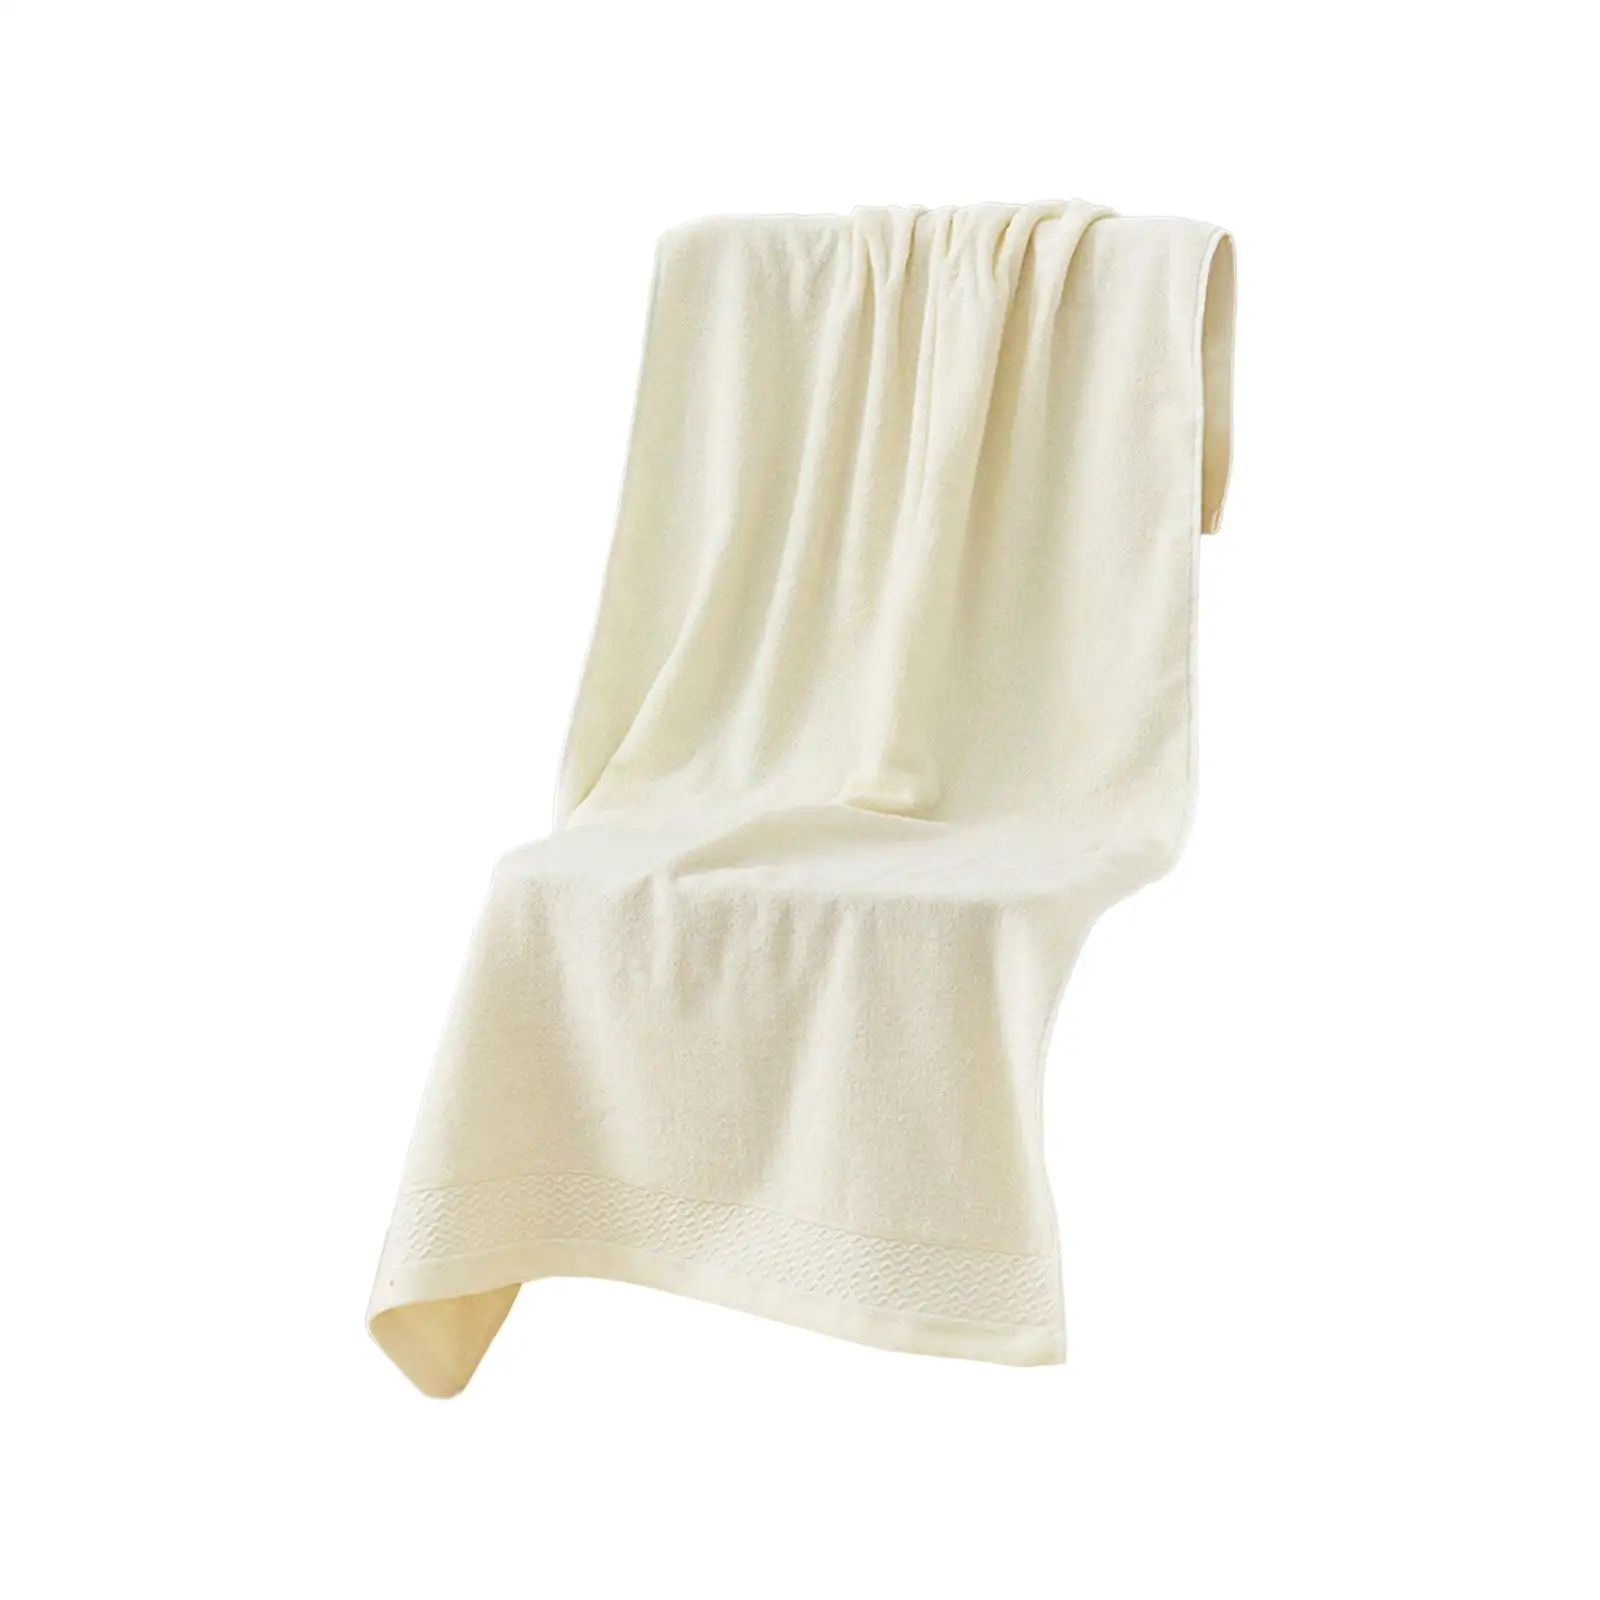 Bath Towels Quick Drying Machine Washable 140Cmx70cm Highly Absorbent Beach Towels for Guests Gyms Beach SPA Pool